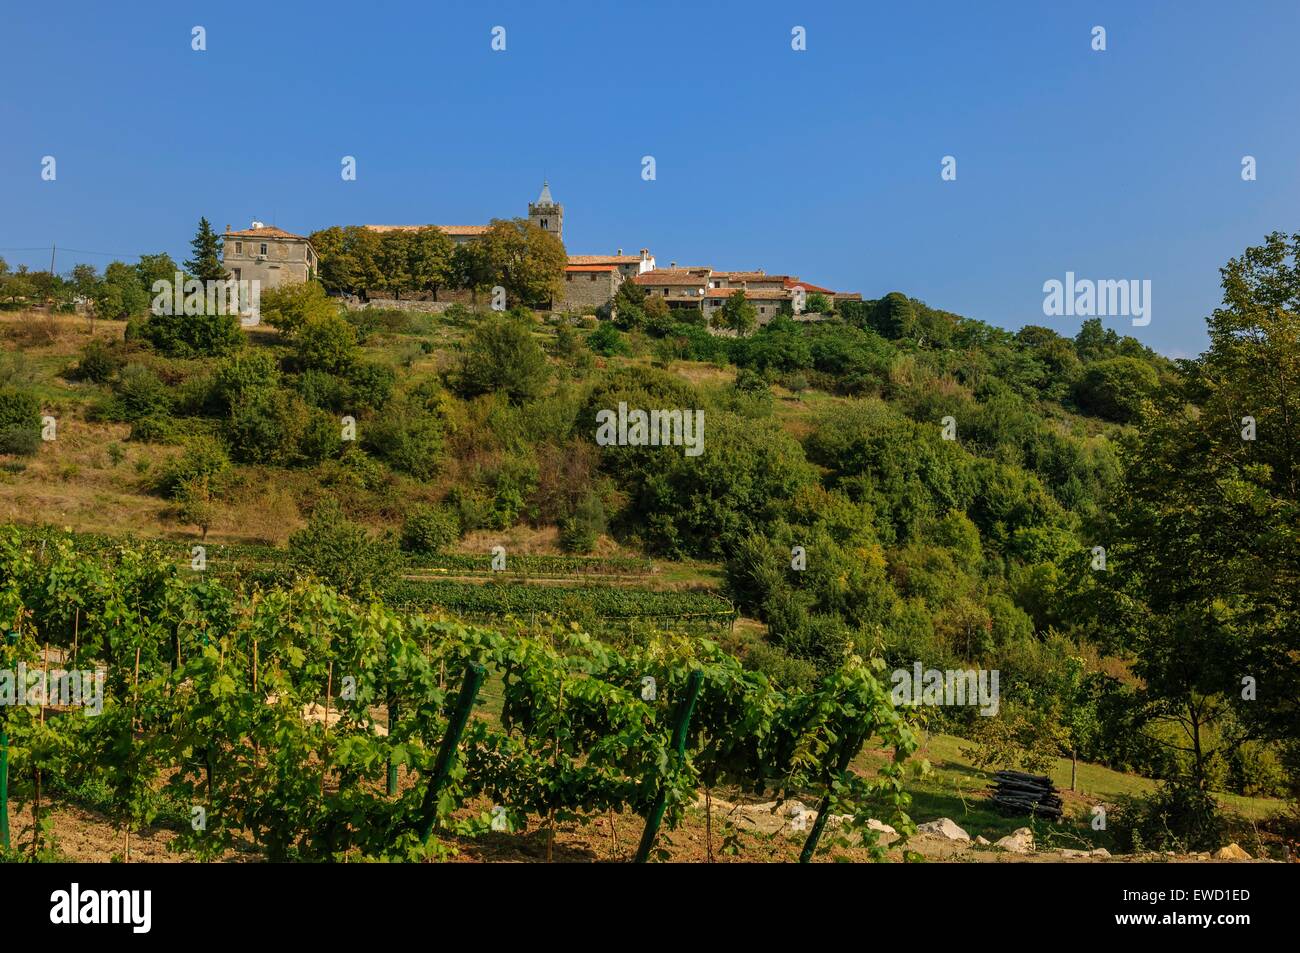 View of Hum,  officially listed as the smallest town in the world. Istria, Croatia Stock Photo